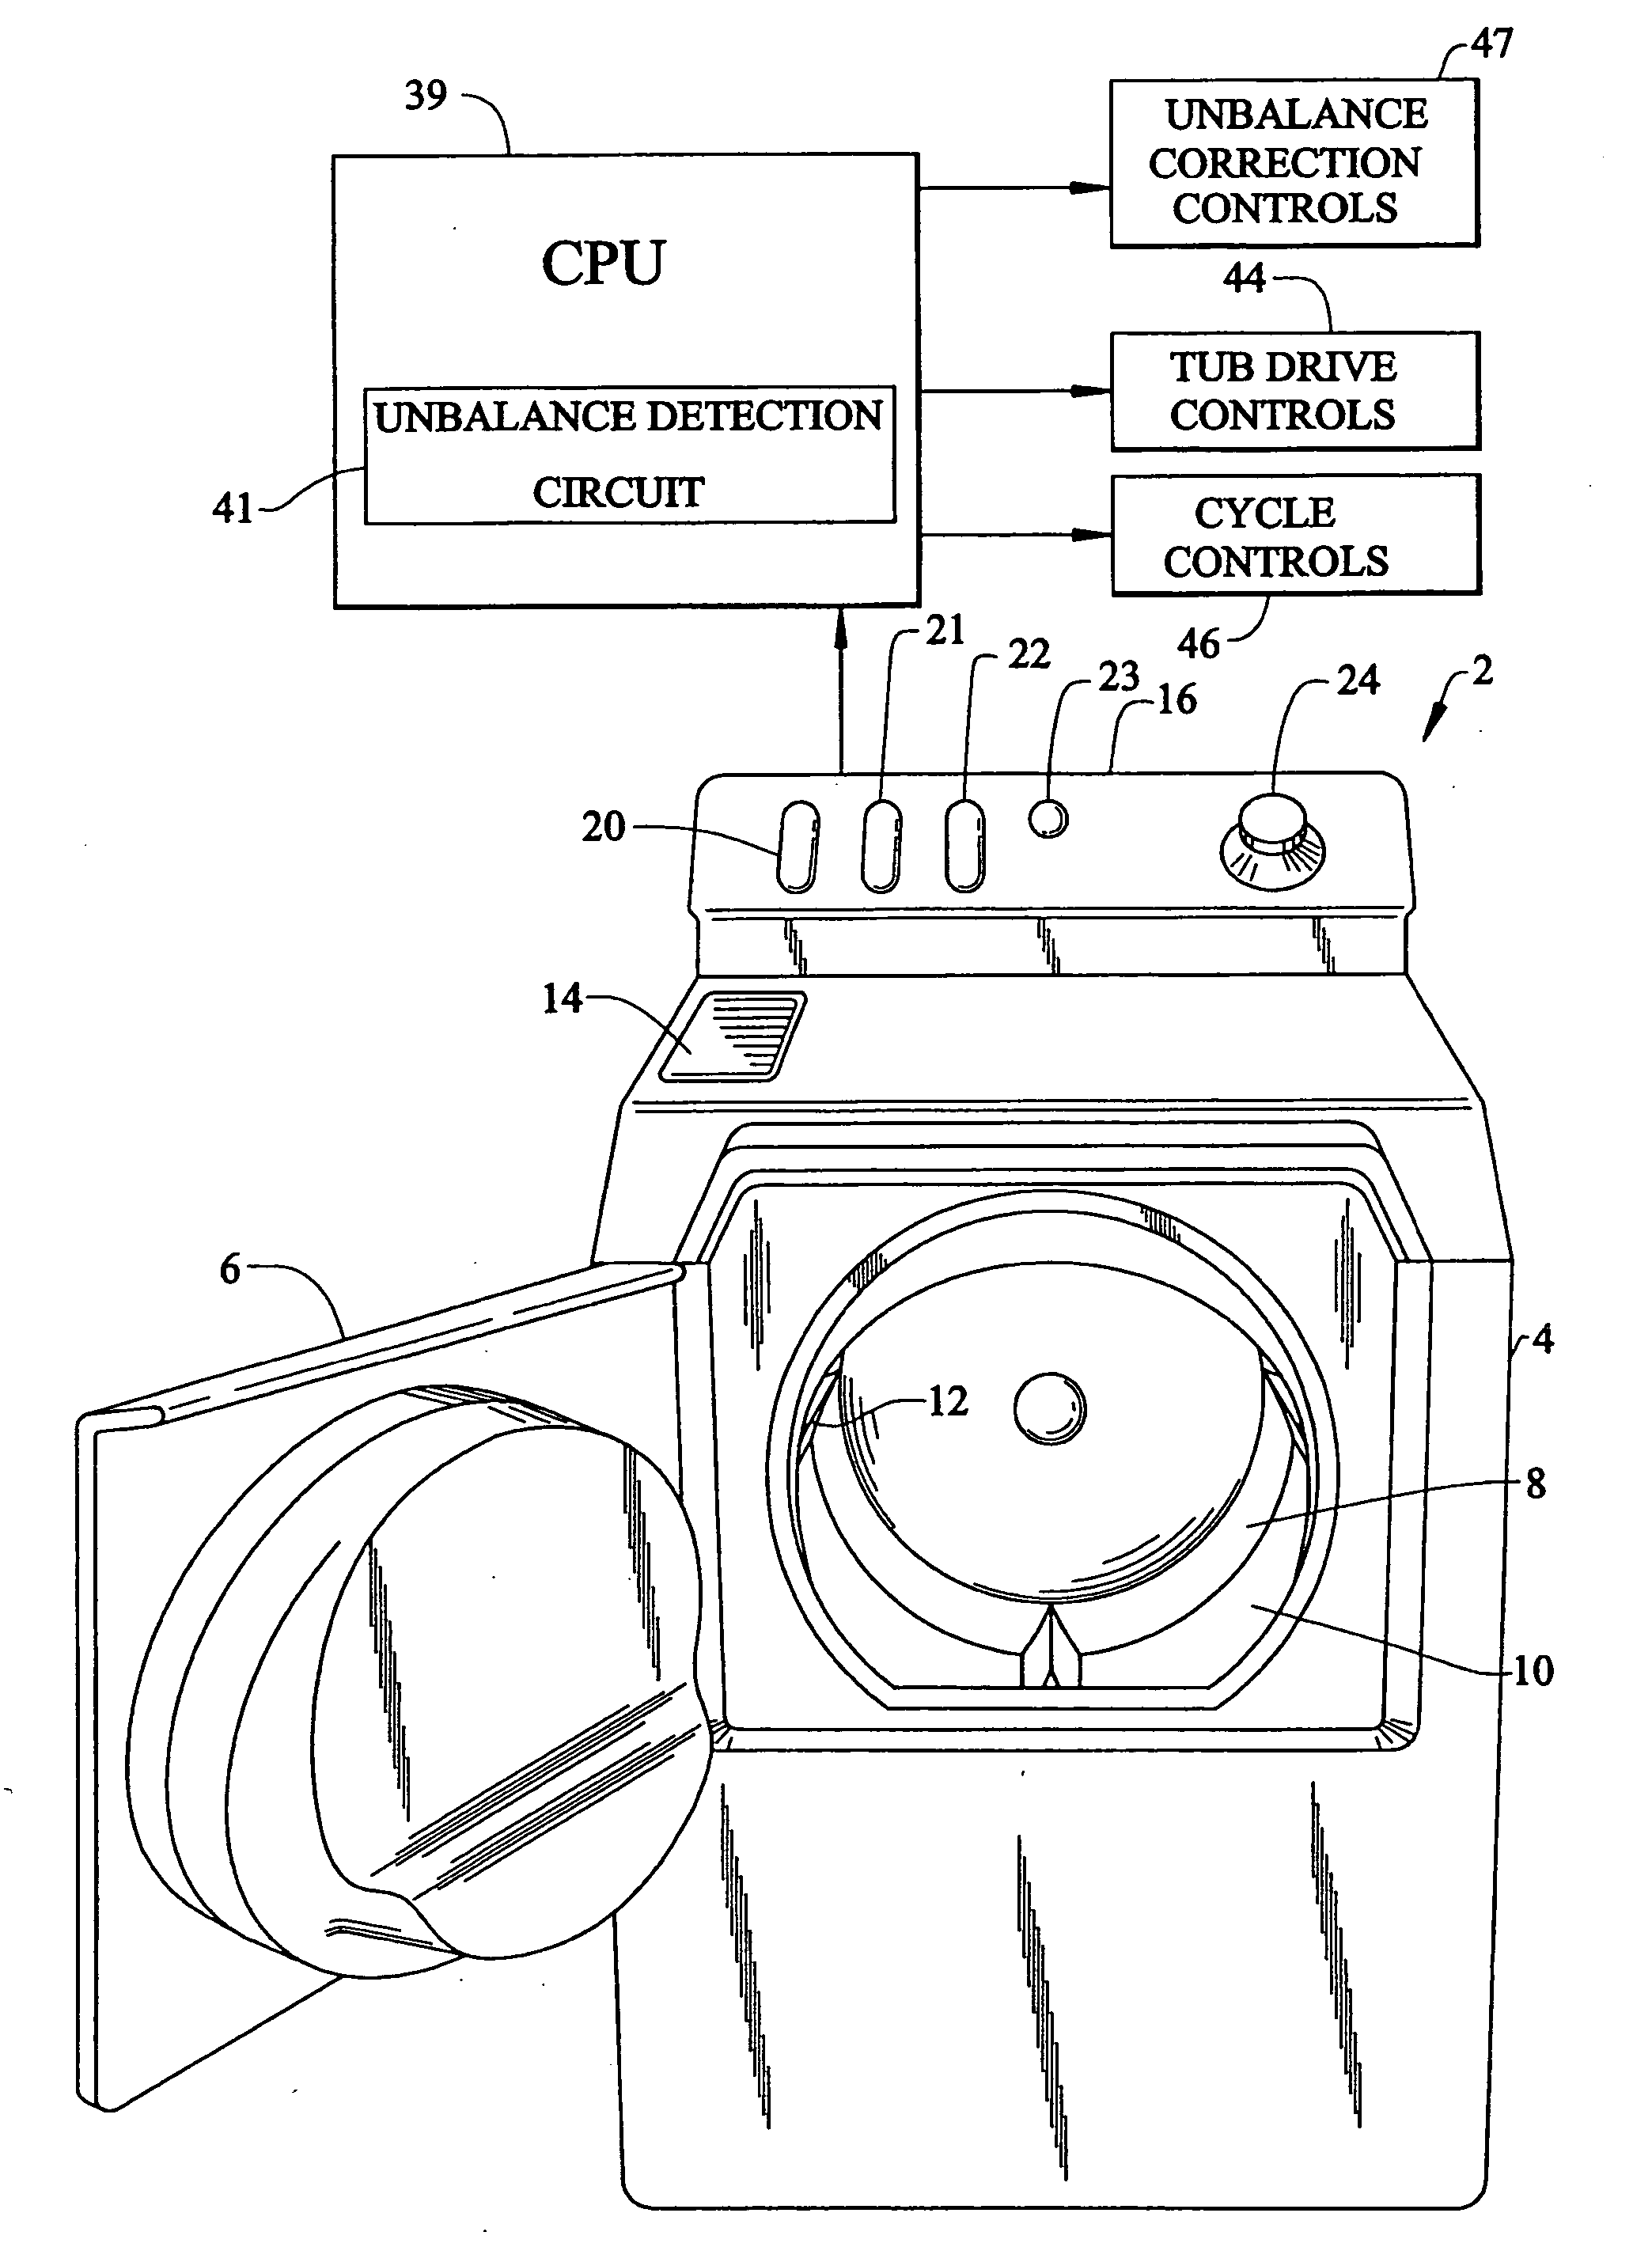 Balancing fluid flow arrangement in an inner tub of a washing machine having an out-of-balance correction system